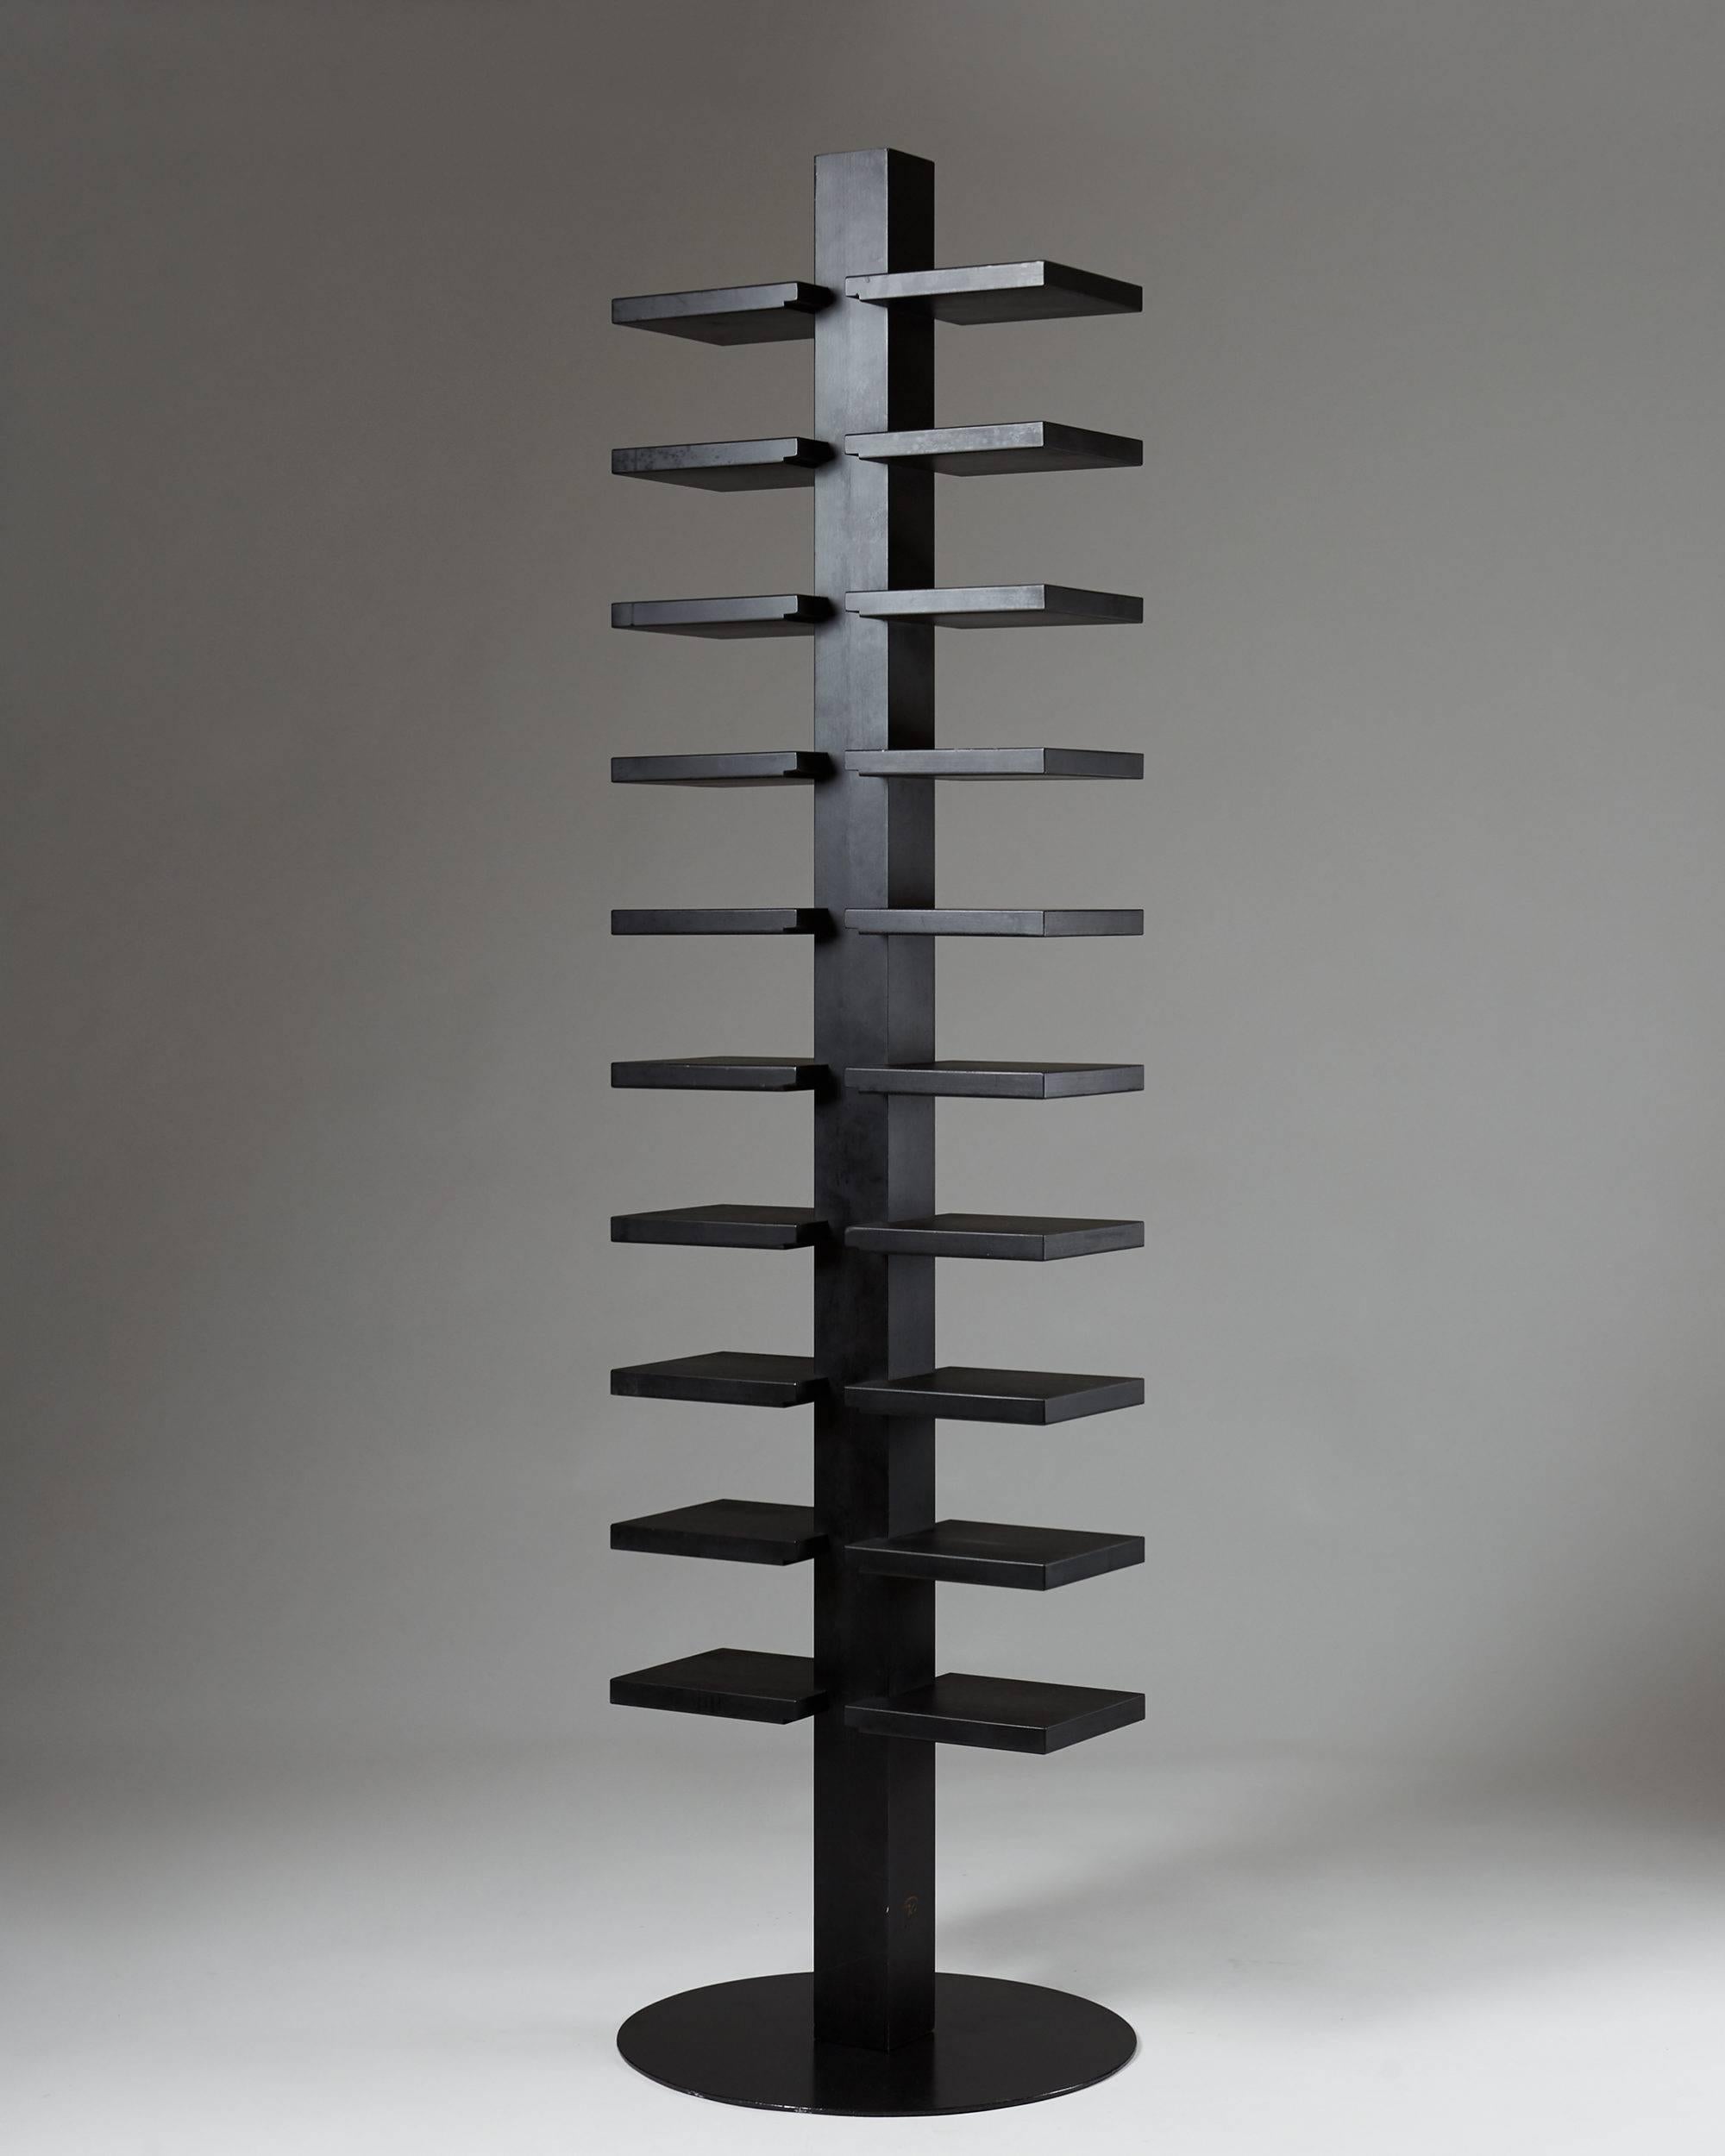 Bookshelf “Double Pilaster” designed by John Kandell for Källemo, Sweden, 1990s.

Lacquered wood and metal.

Measures: H 180 cm / 5' 11 1/4''.